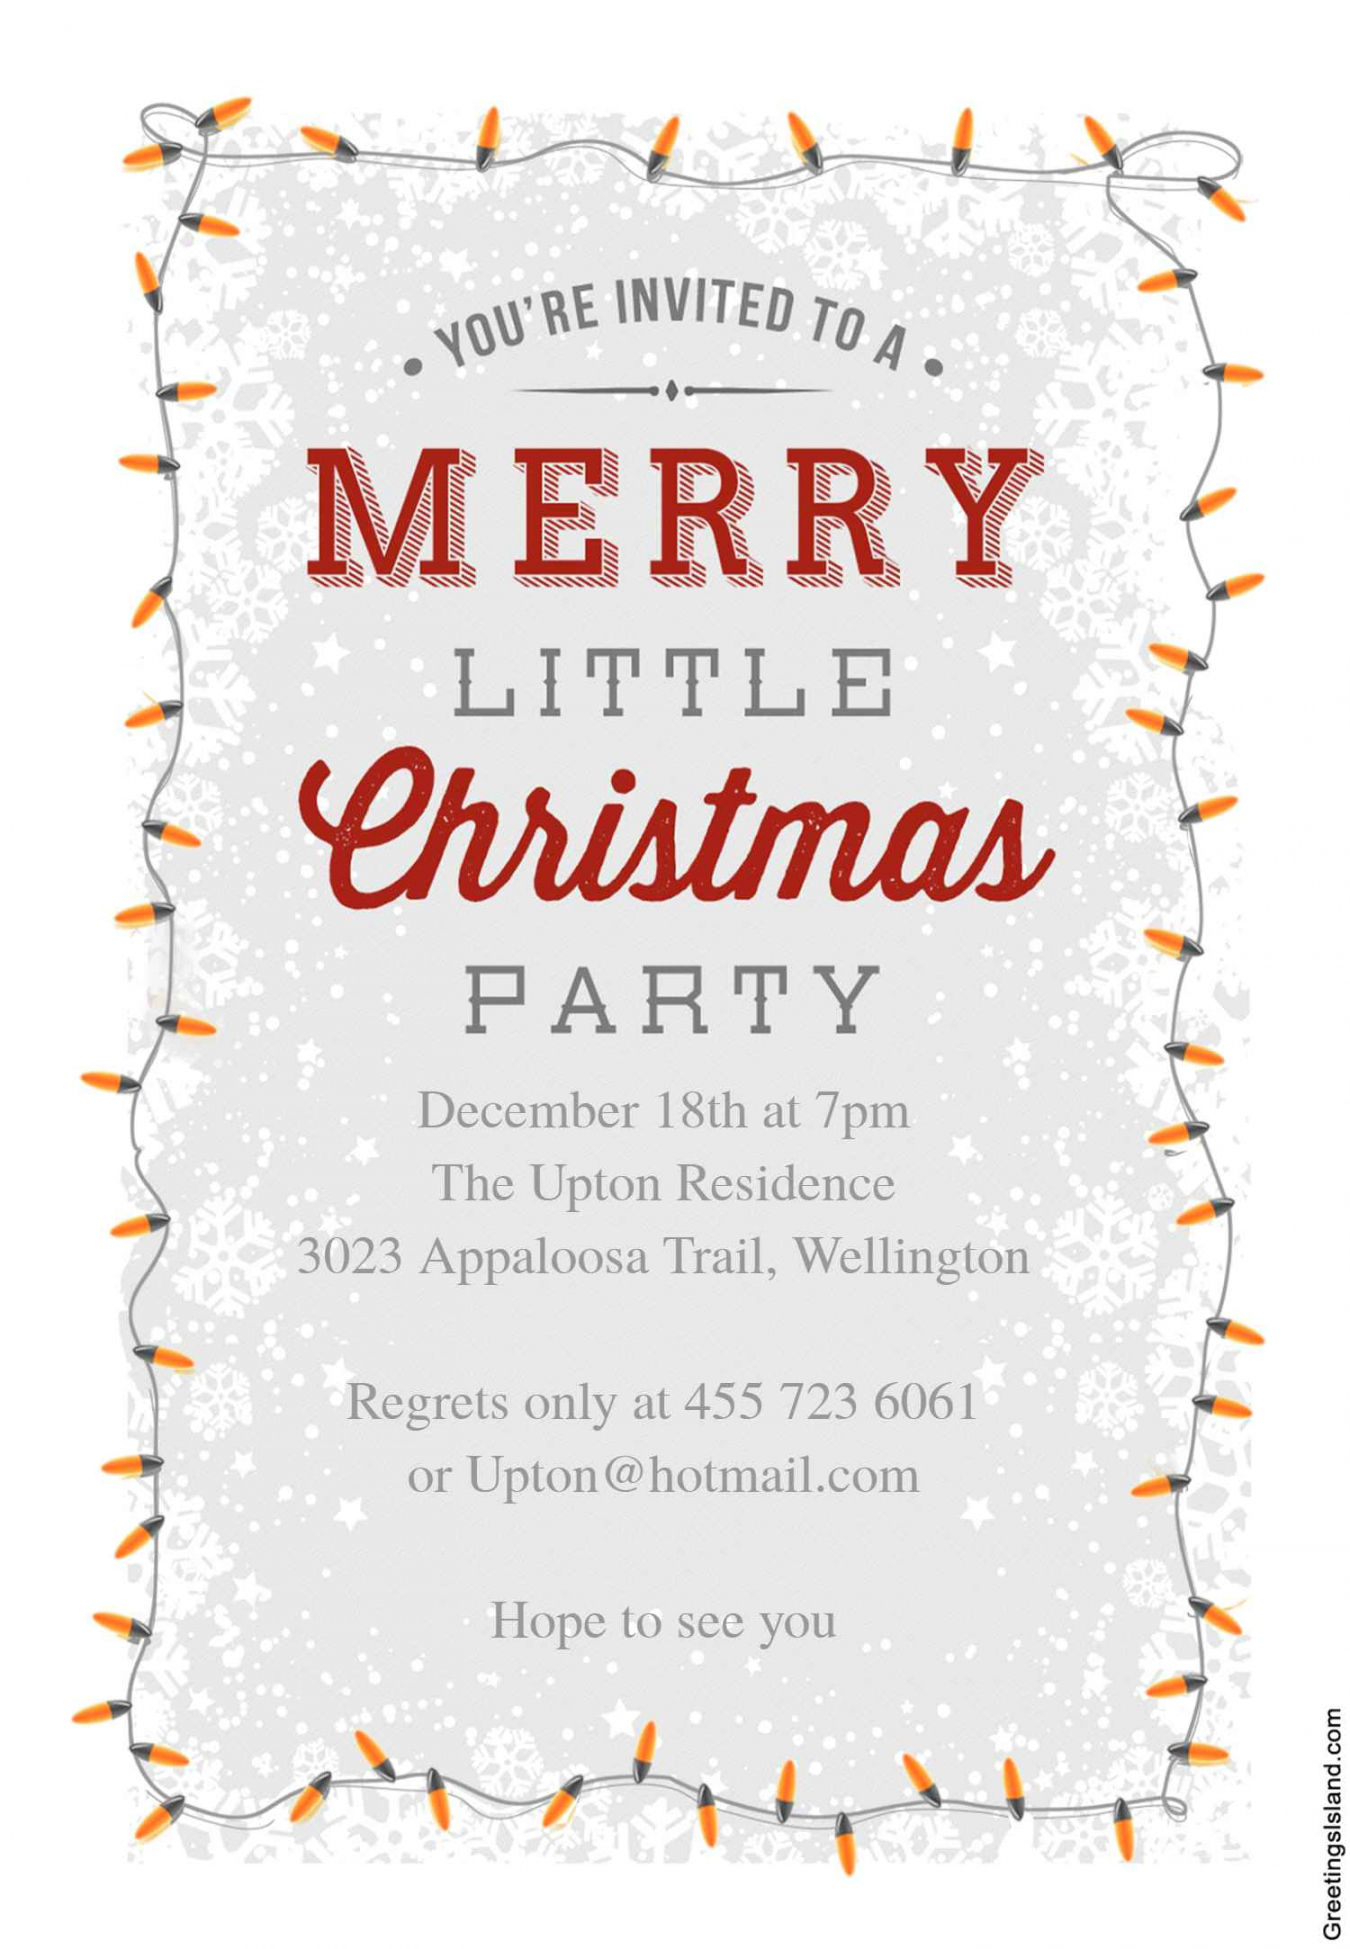 Free Christmas Party Invitations That You Can Print - FREE Printables - Christmas Party Invitation Templates Free Printable